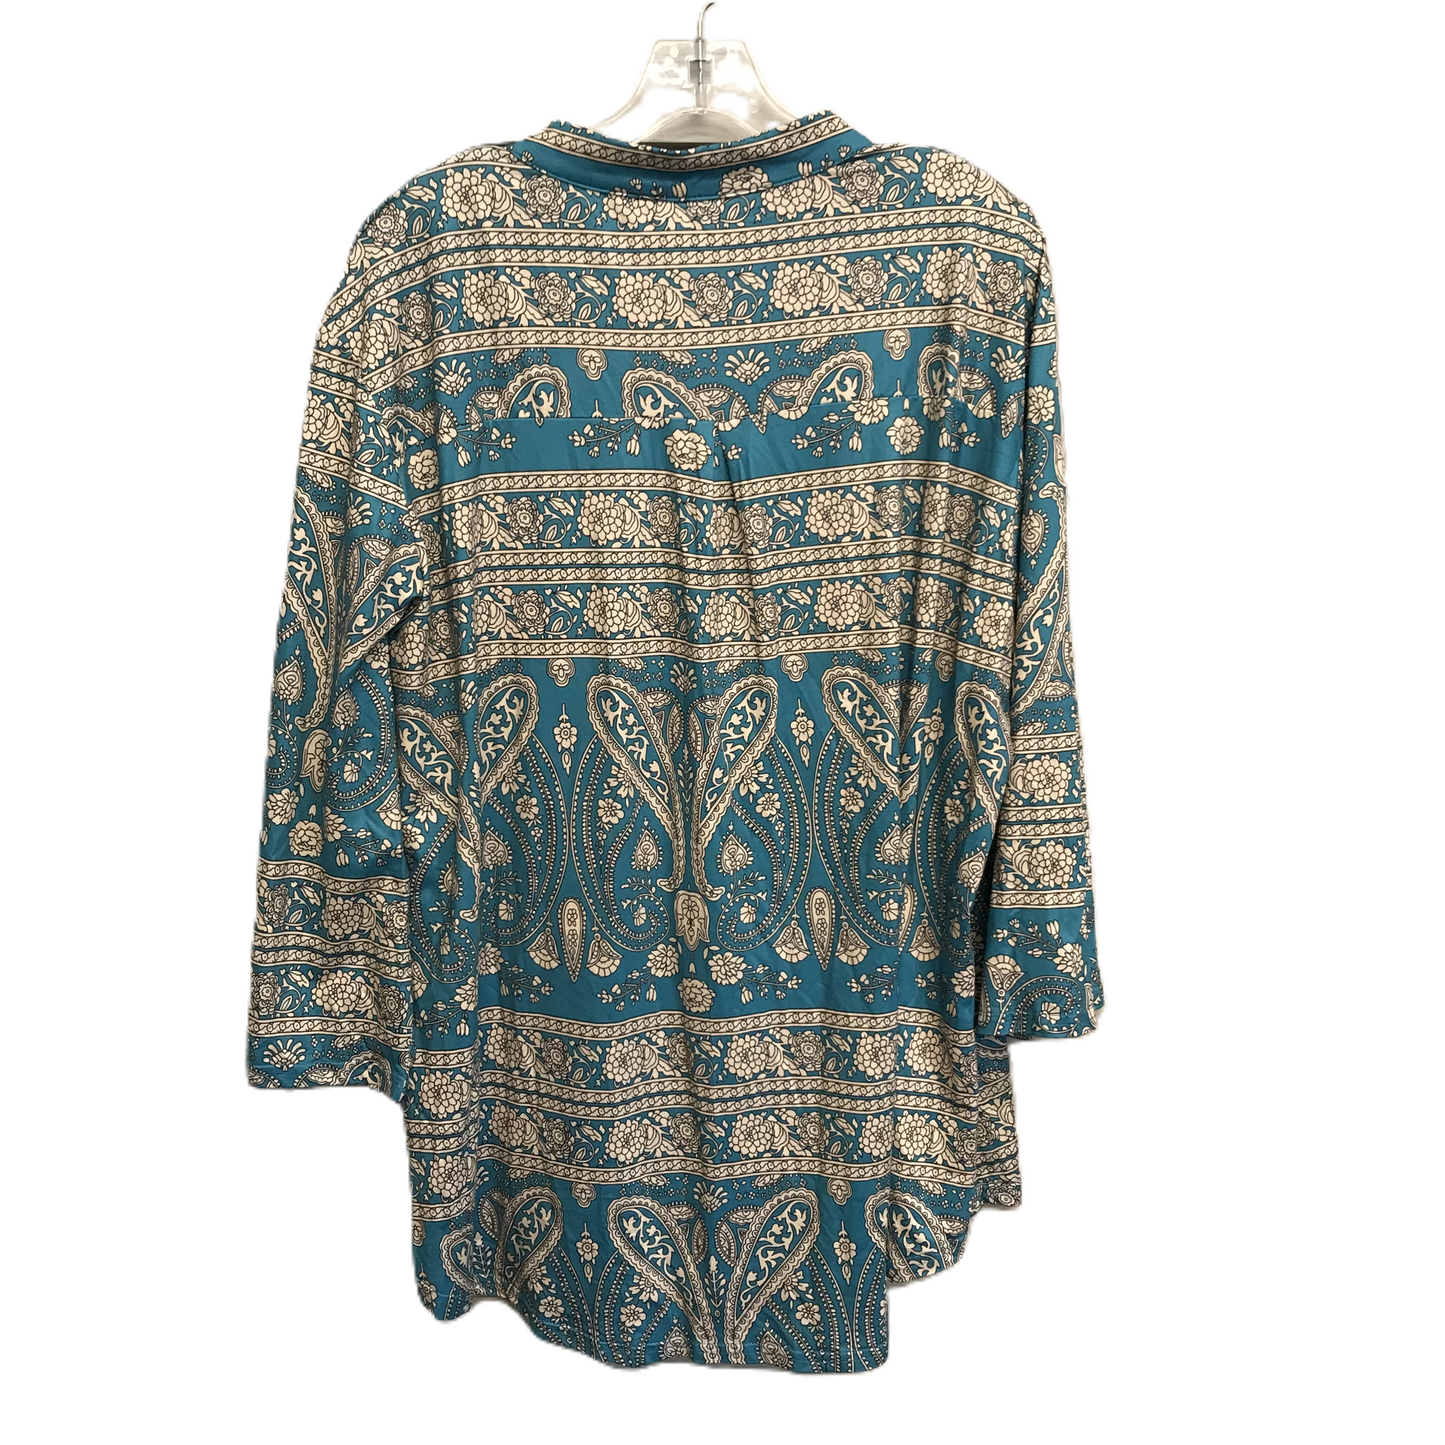 Teal Top Long Sleeve By ZENBRIELE, Size: 3x